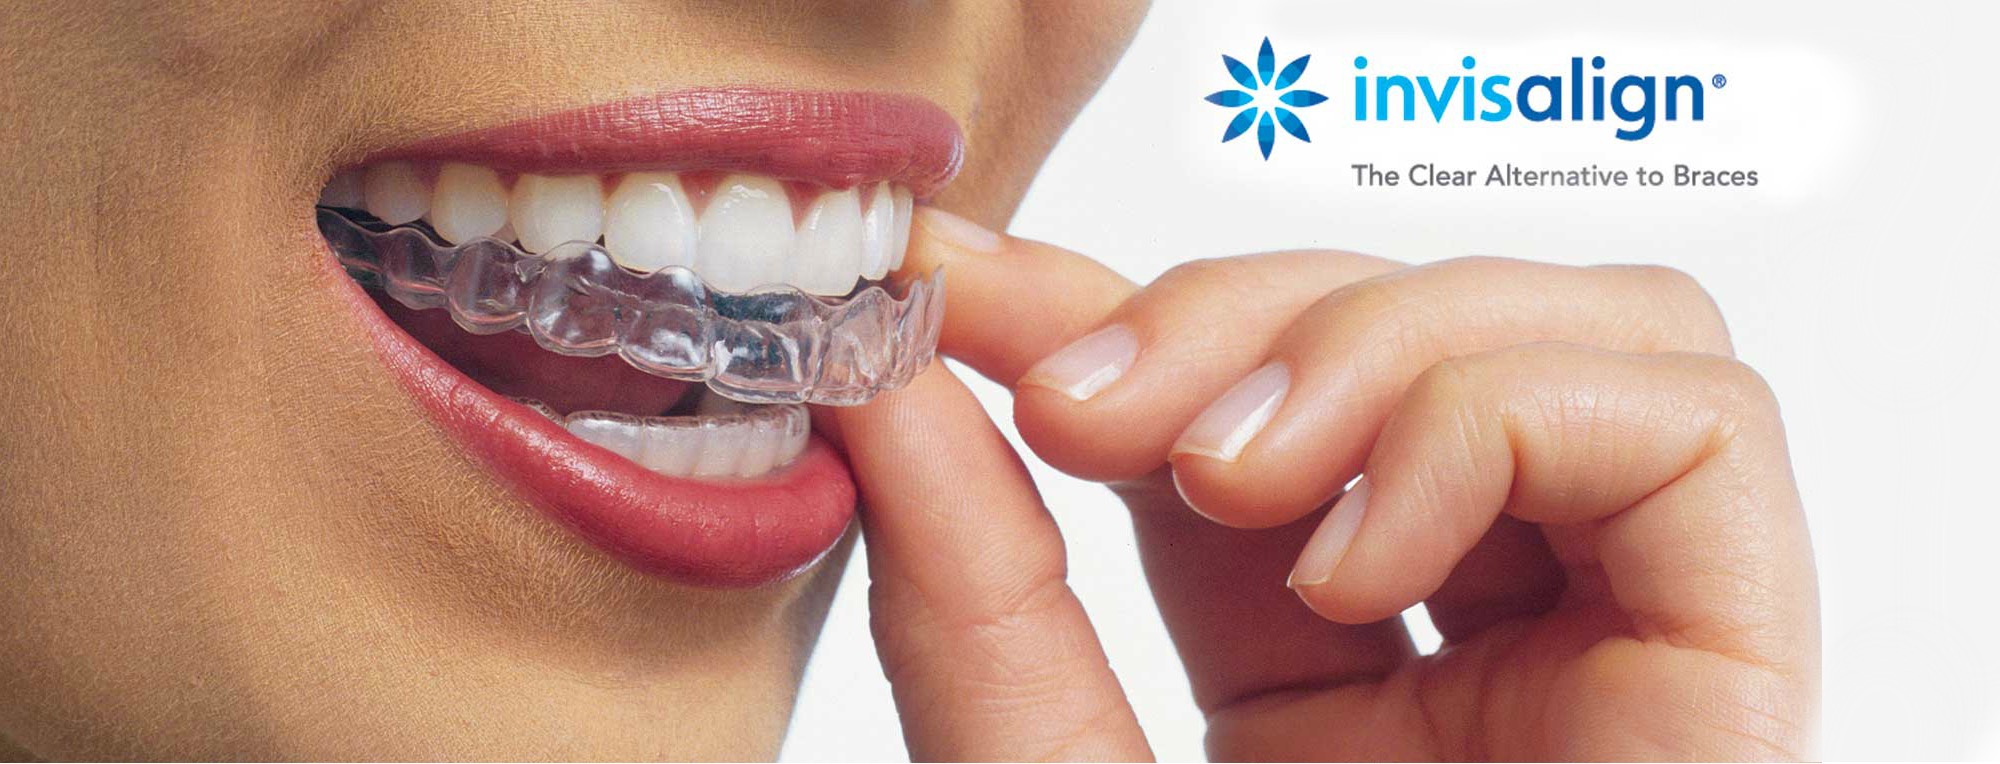 About Invisalign® - The Brace Space